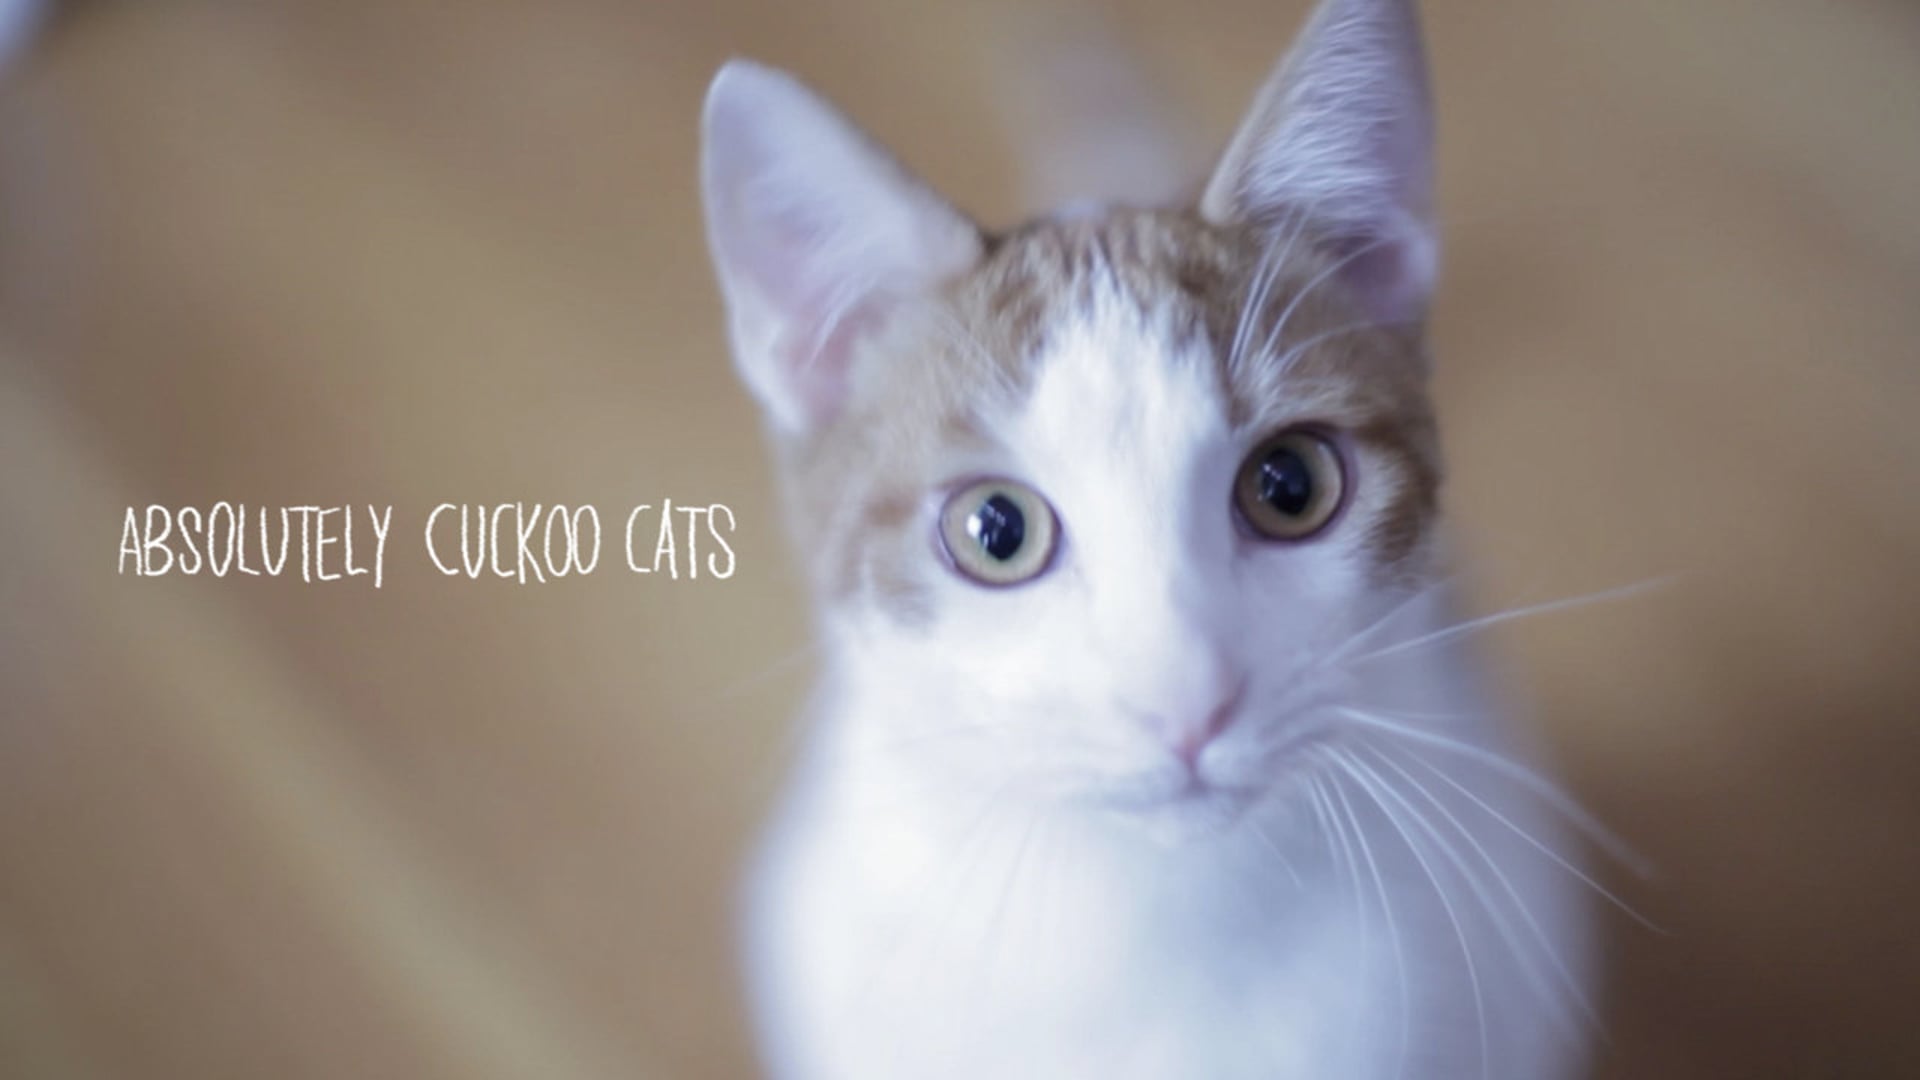 Absolutely Cuckoo Cats